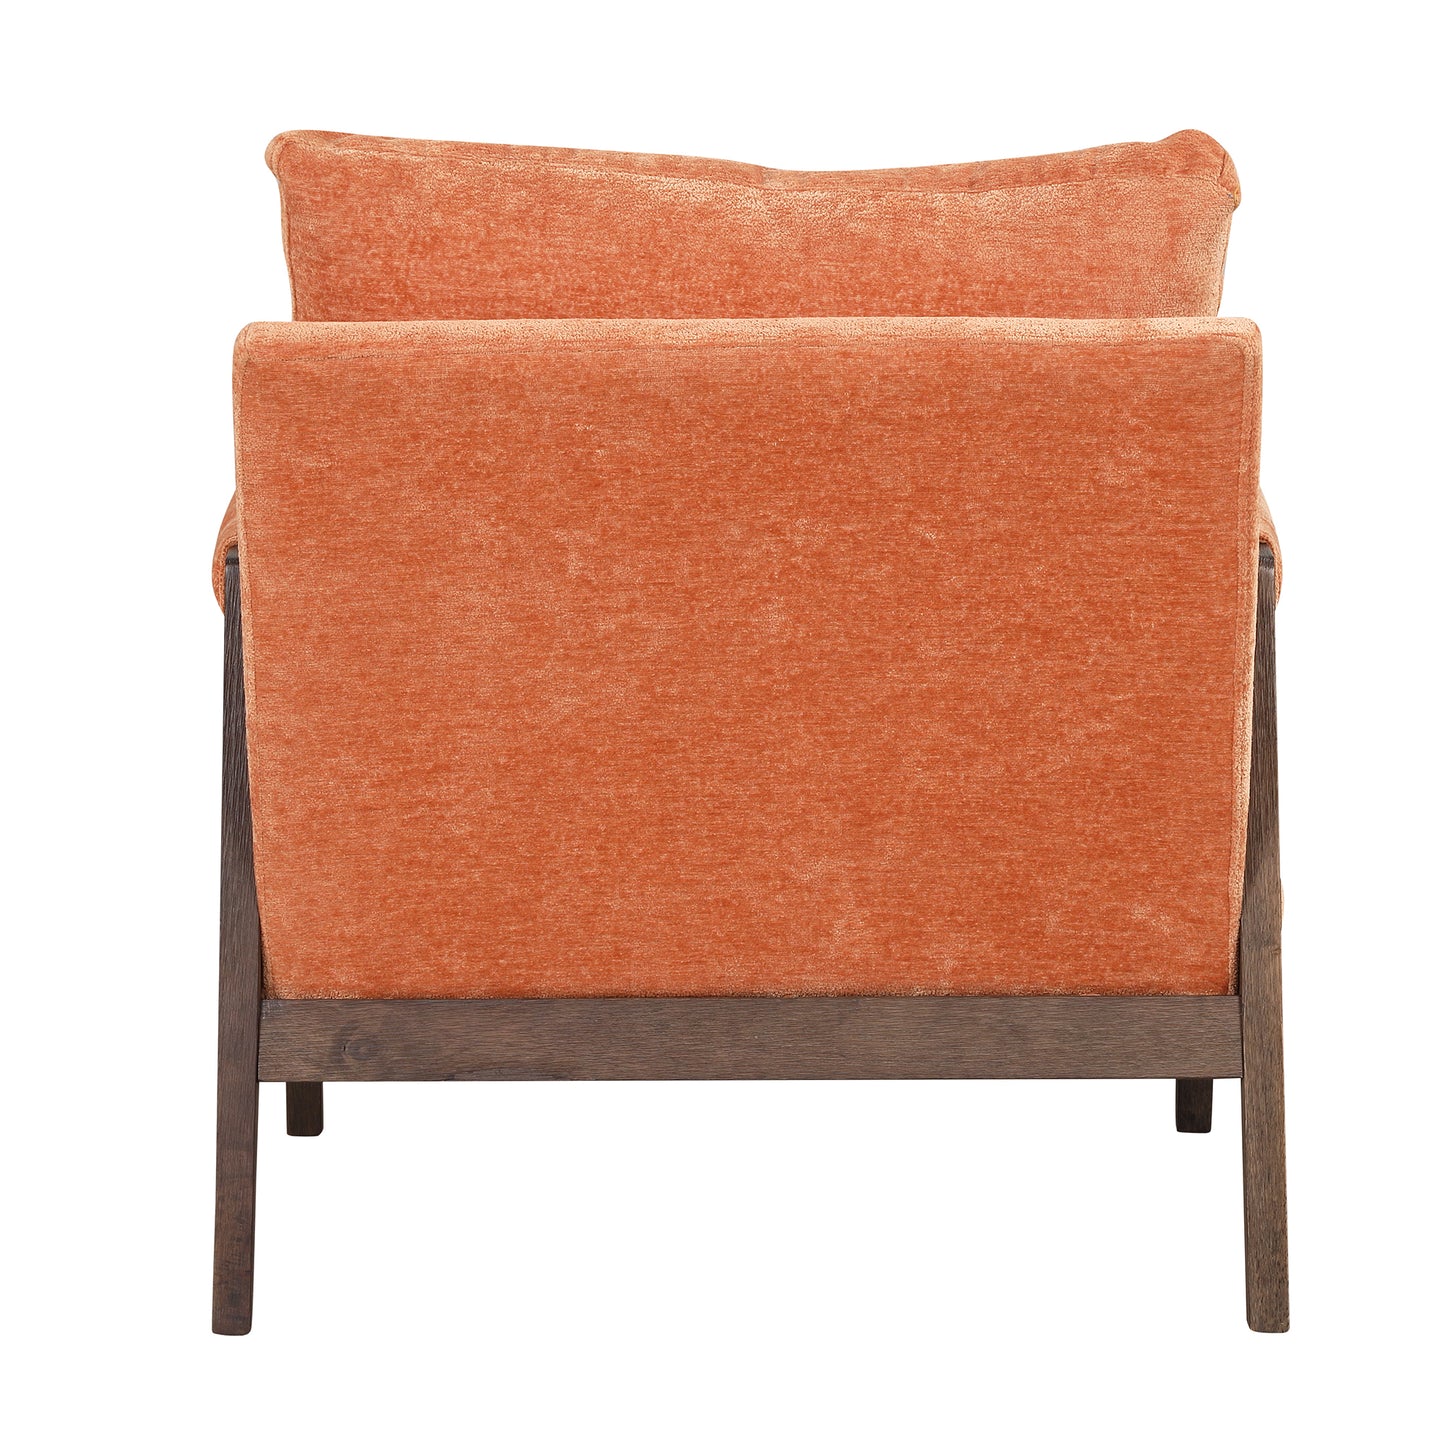 Mid-Century Modern Velvet Accent Chair,Leisure Chair with Solid Wood and Thick Seat Cushion for Living Room,Bedroom,Studio,Orange